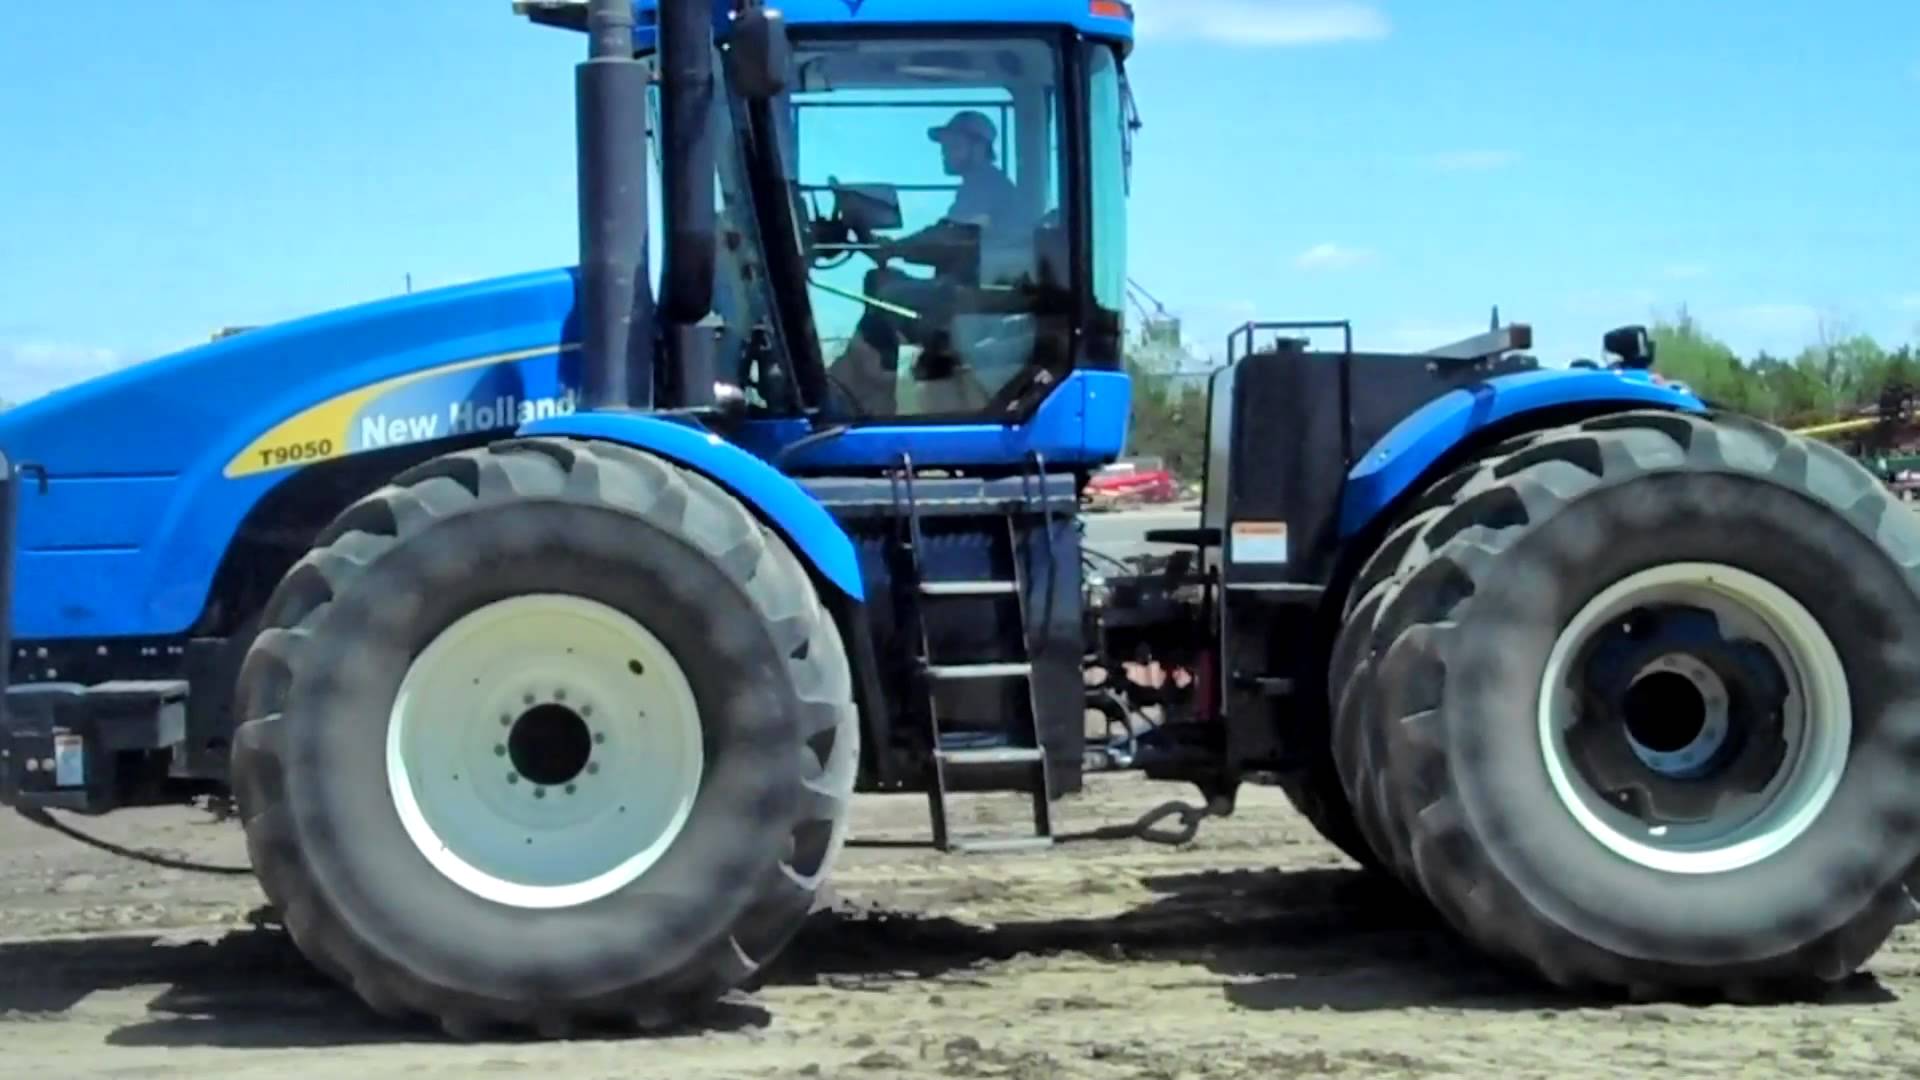 New Holland T9050 Tractor Sold on ELS! - YouTube